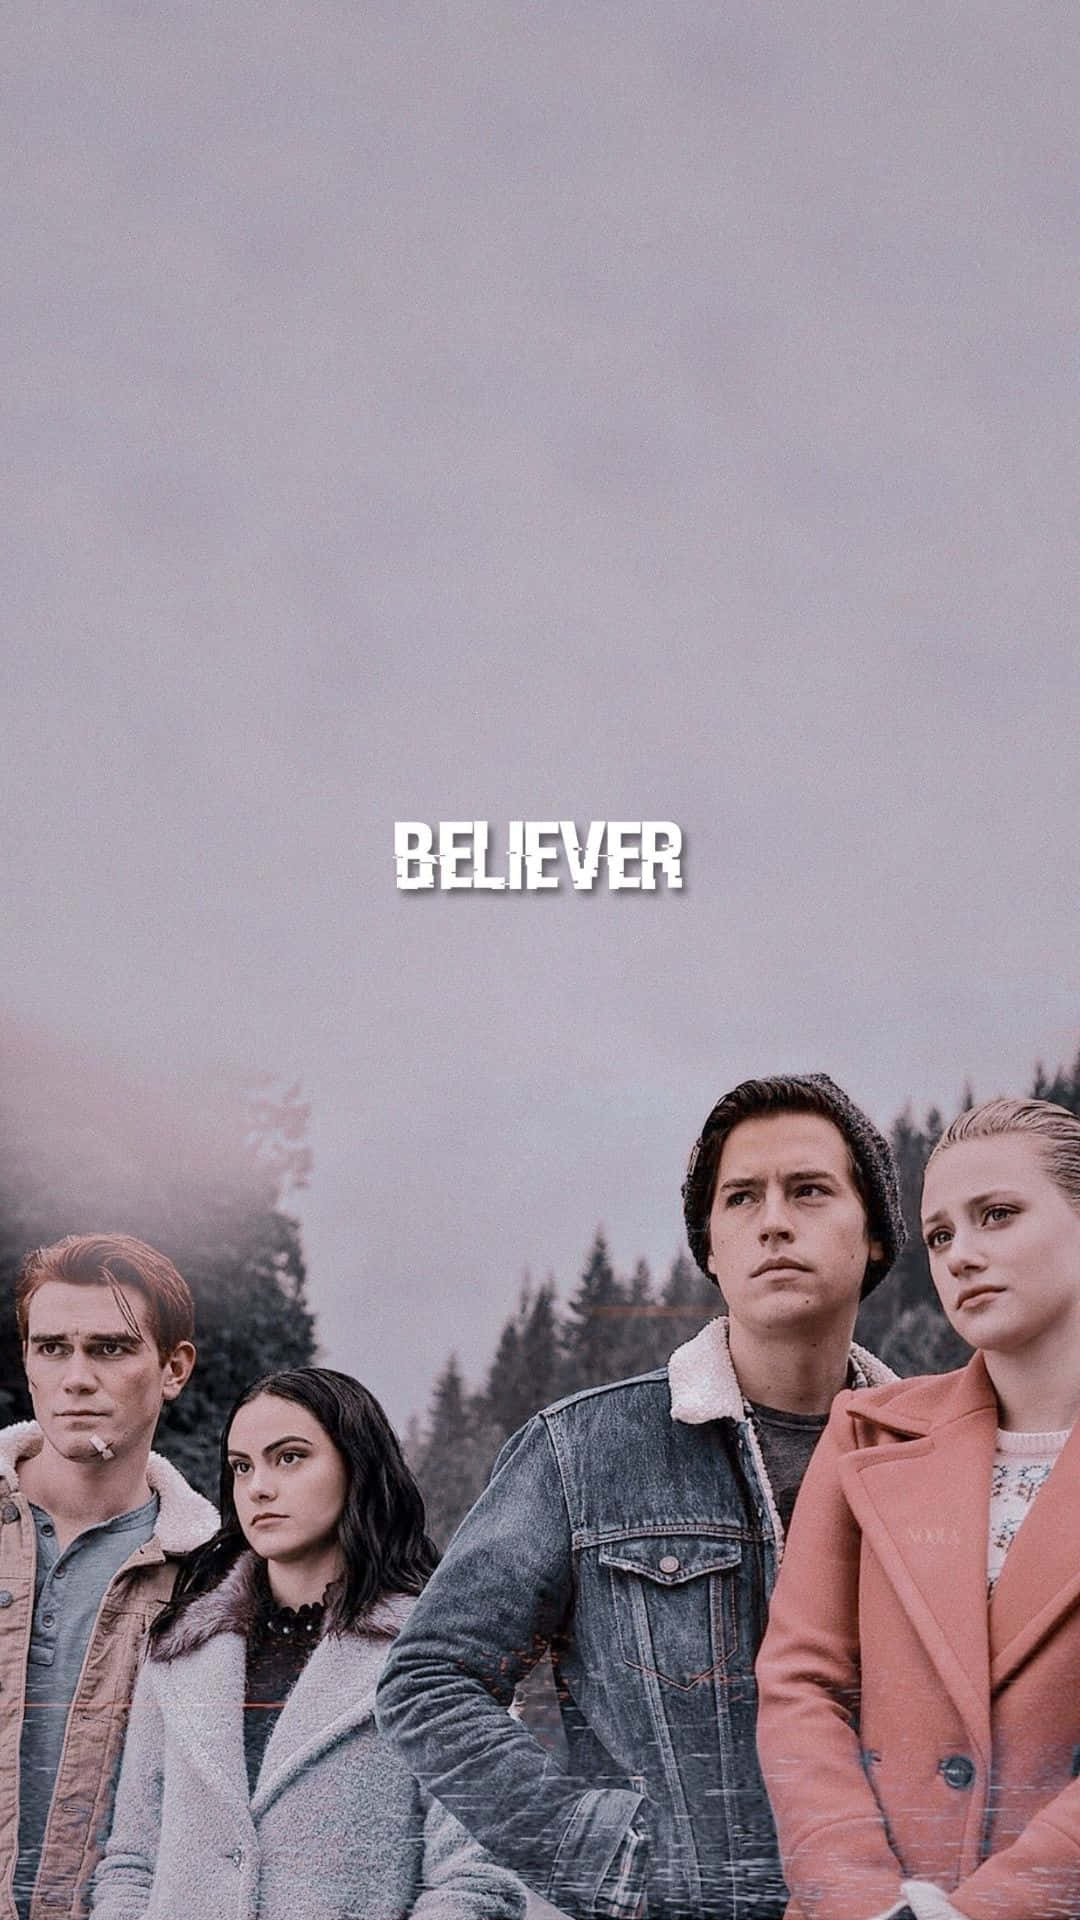 Riverdale Poster featuring the Main Characters